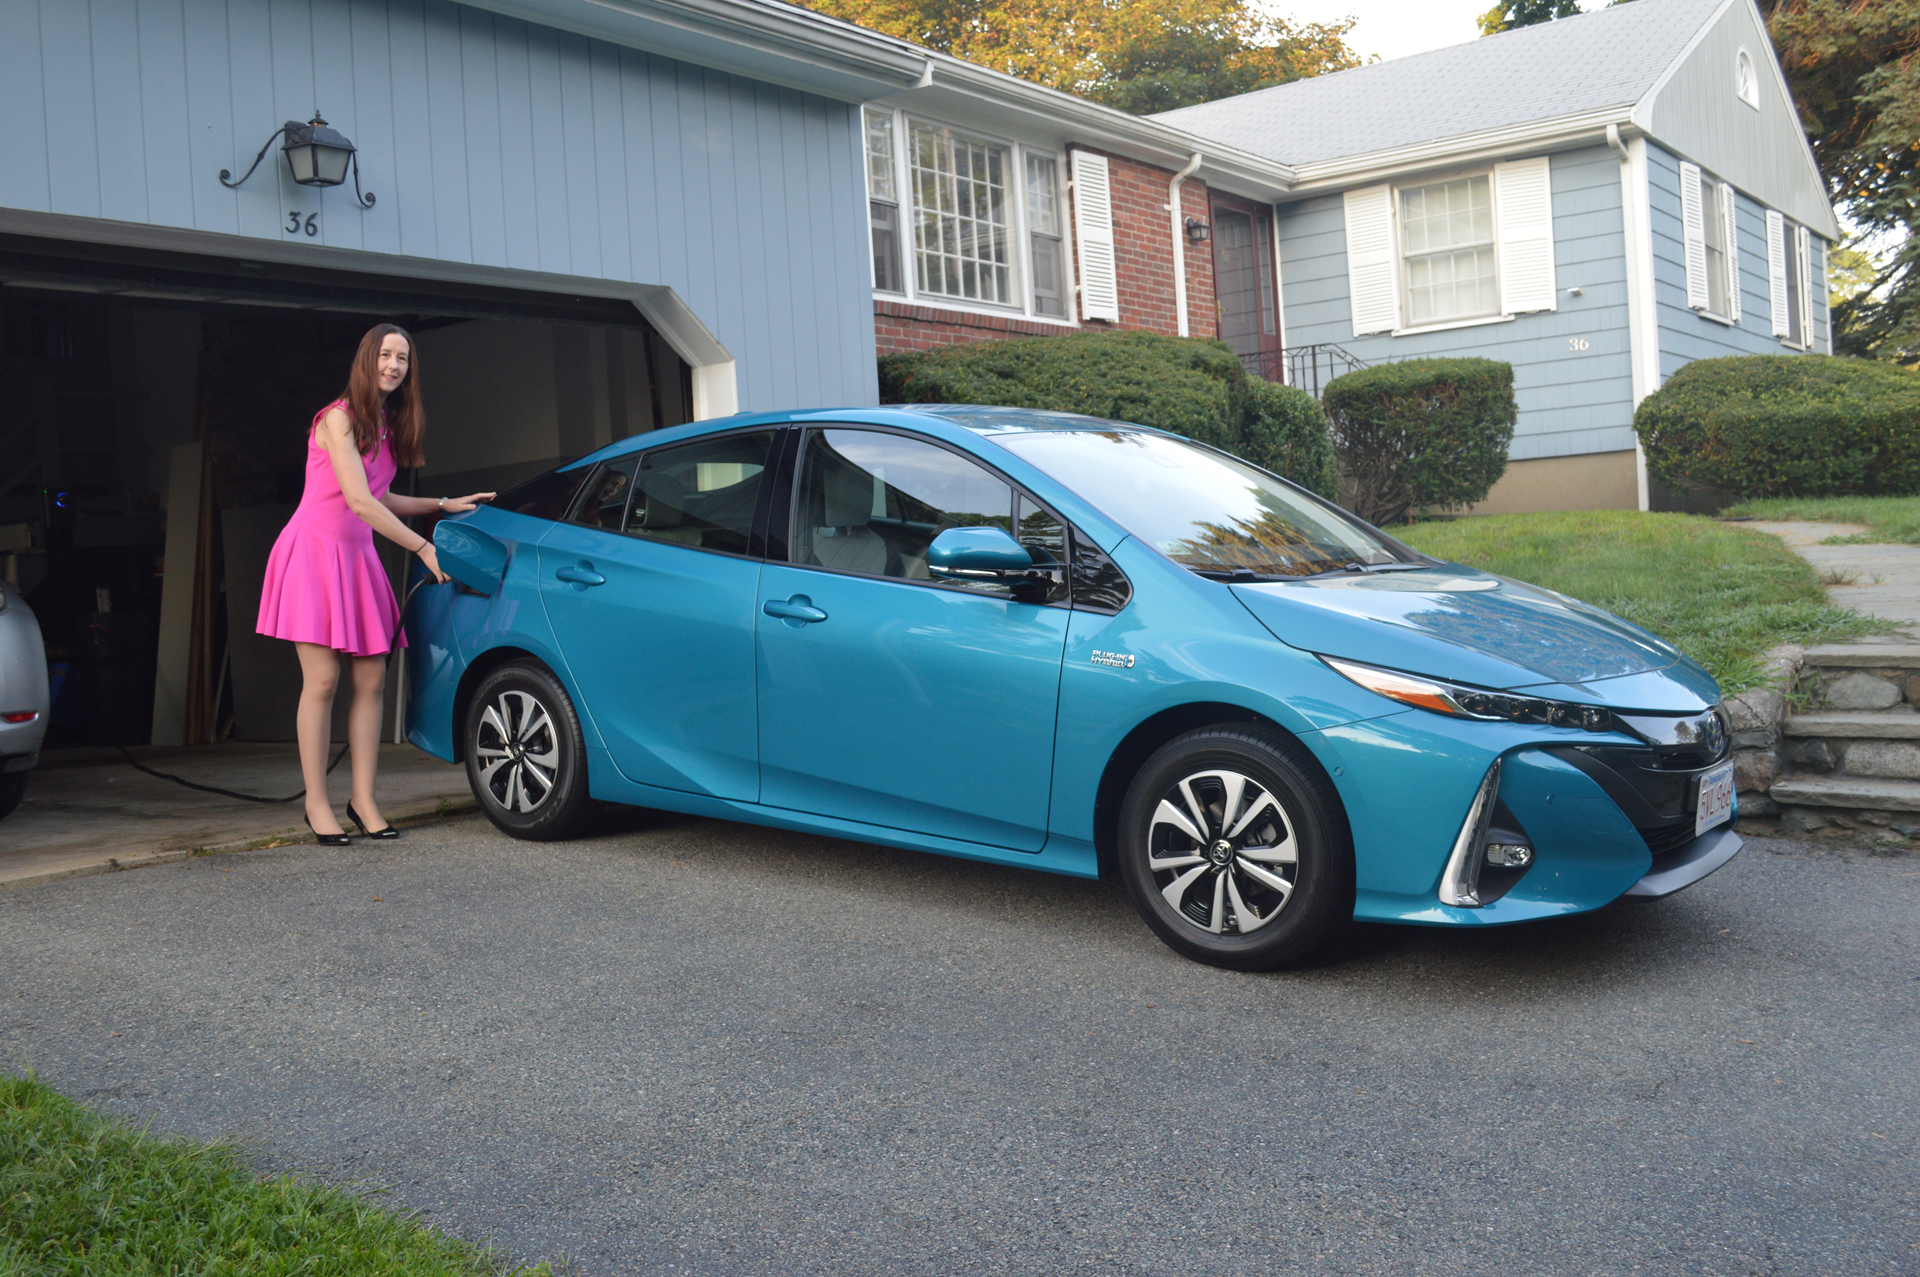 Follow-up: In the end, I bought a Toyota Prius Prime plug-in hybrid